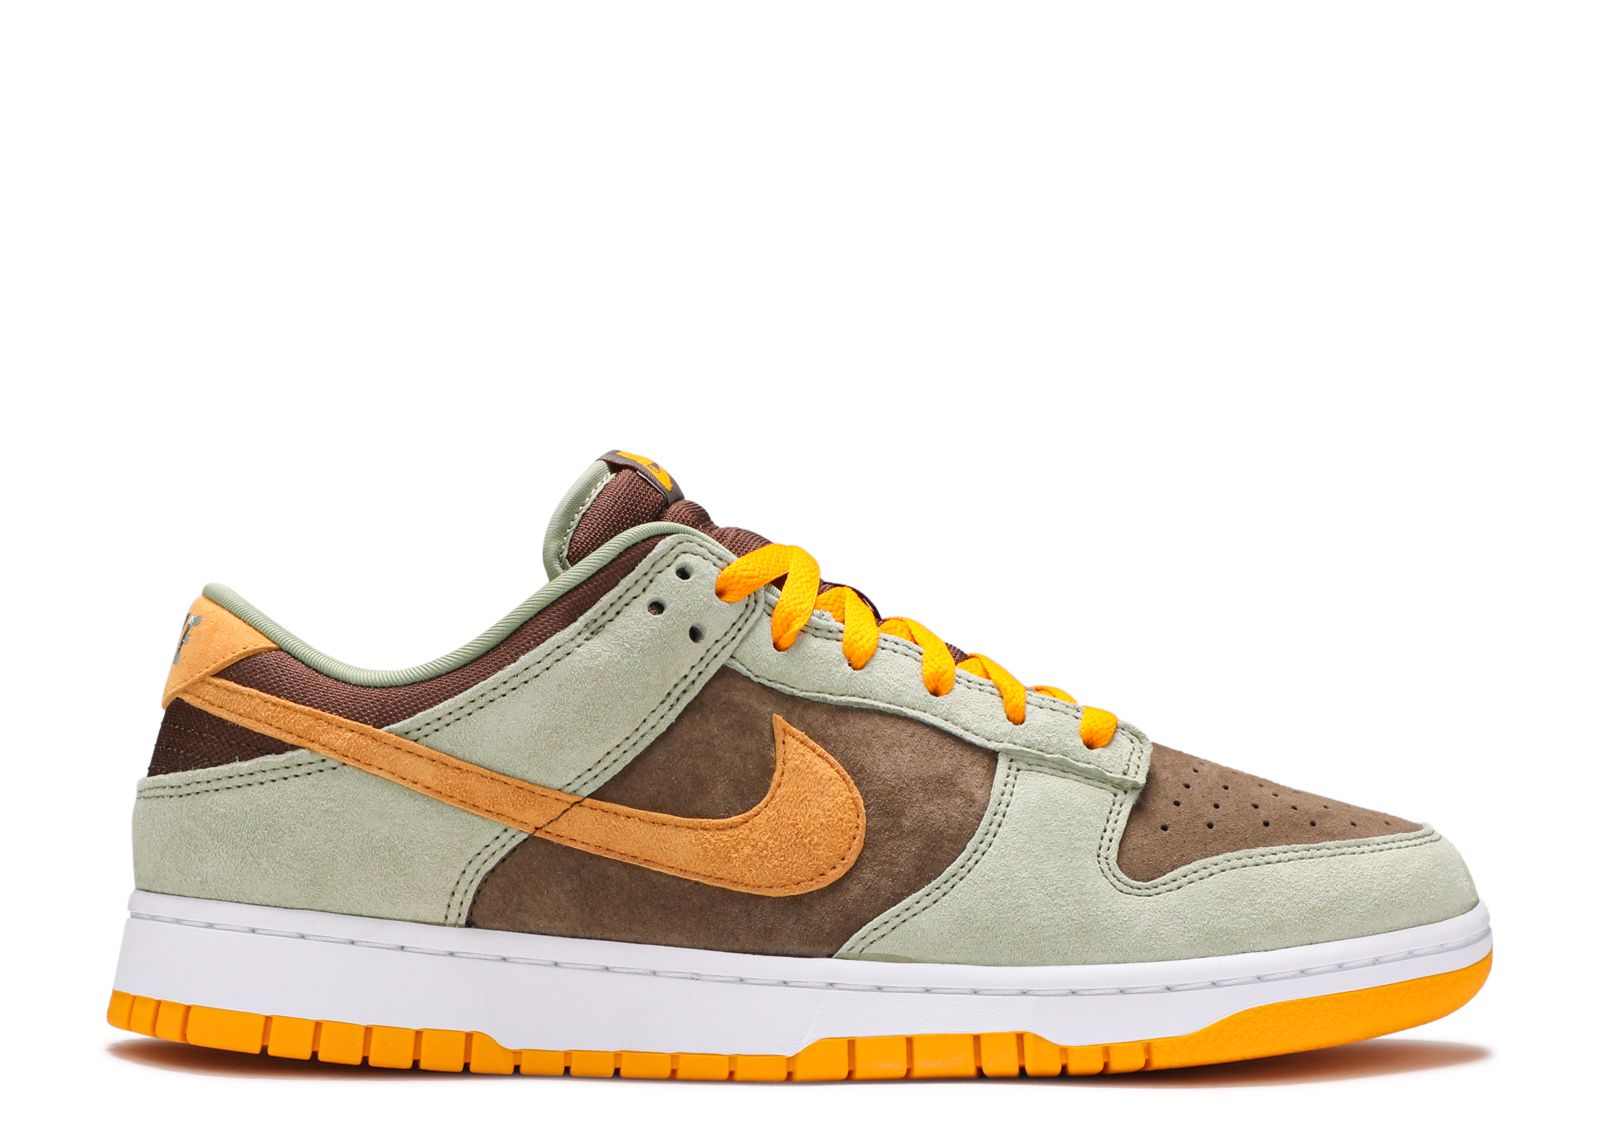 Кроссовки Nike Dunk Low 'Dusty Olive', зеленый original 2020 new nike dunk low ceramic men s running shoes authentic sports womens sneakers ugly duckling size 36 36 da1469 001